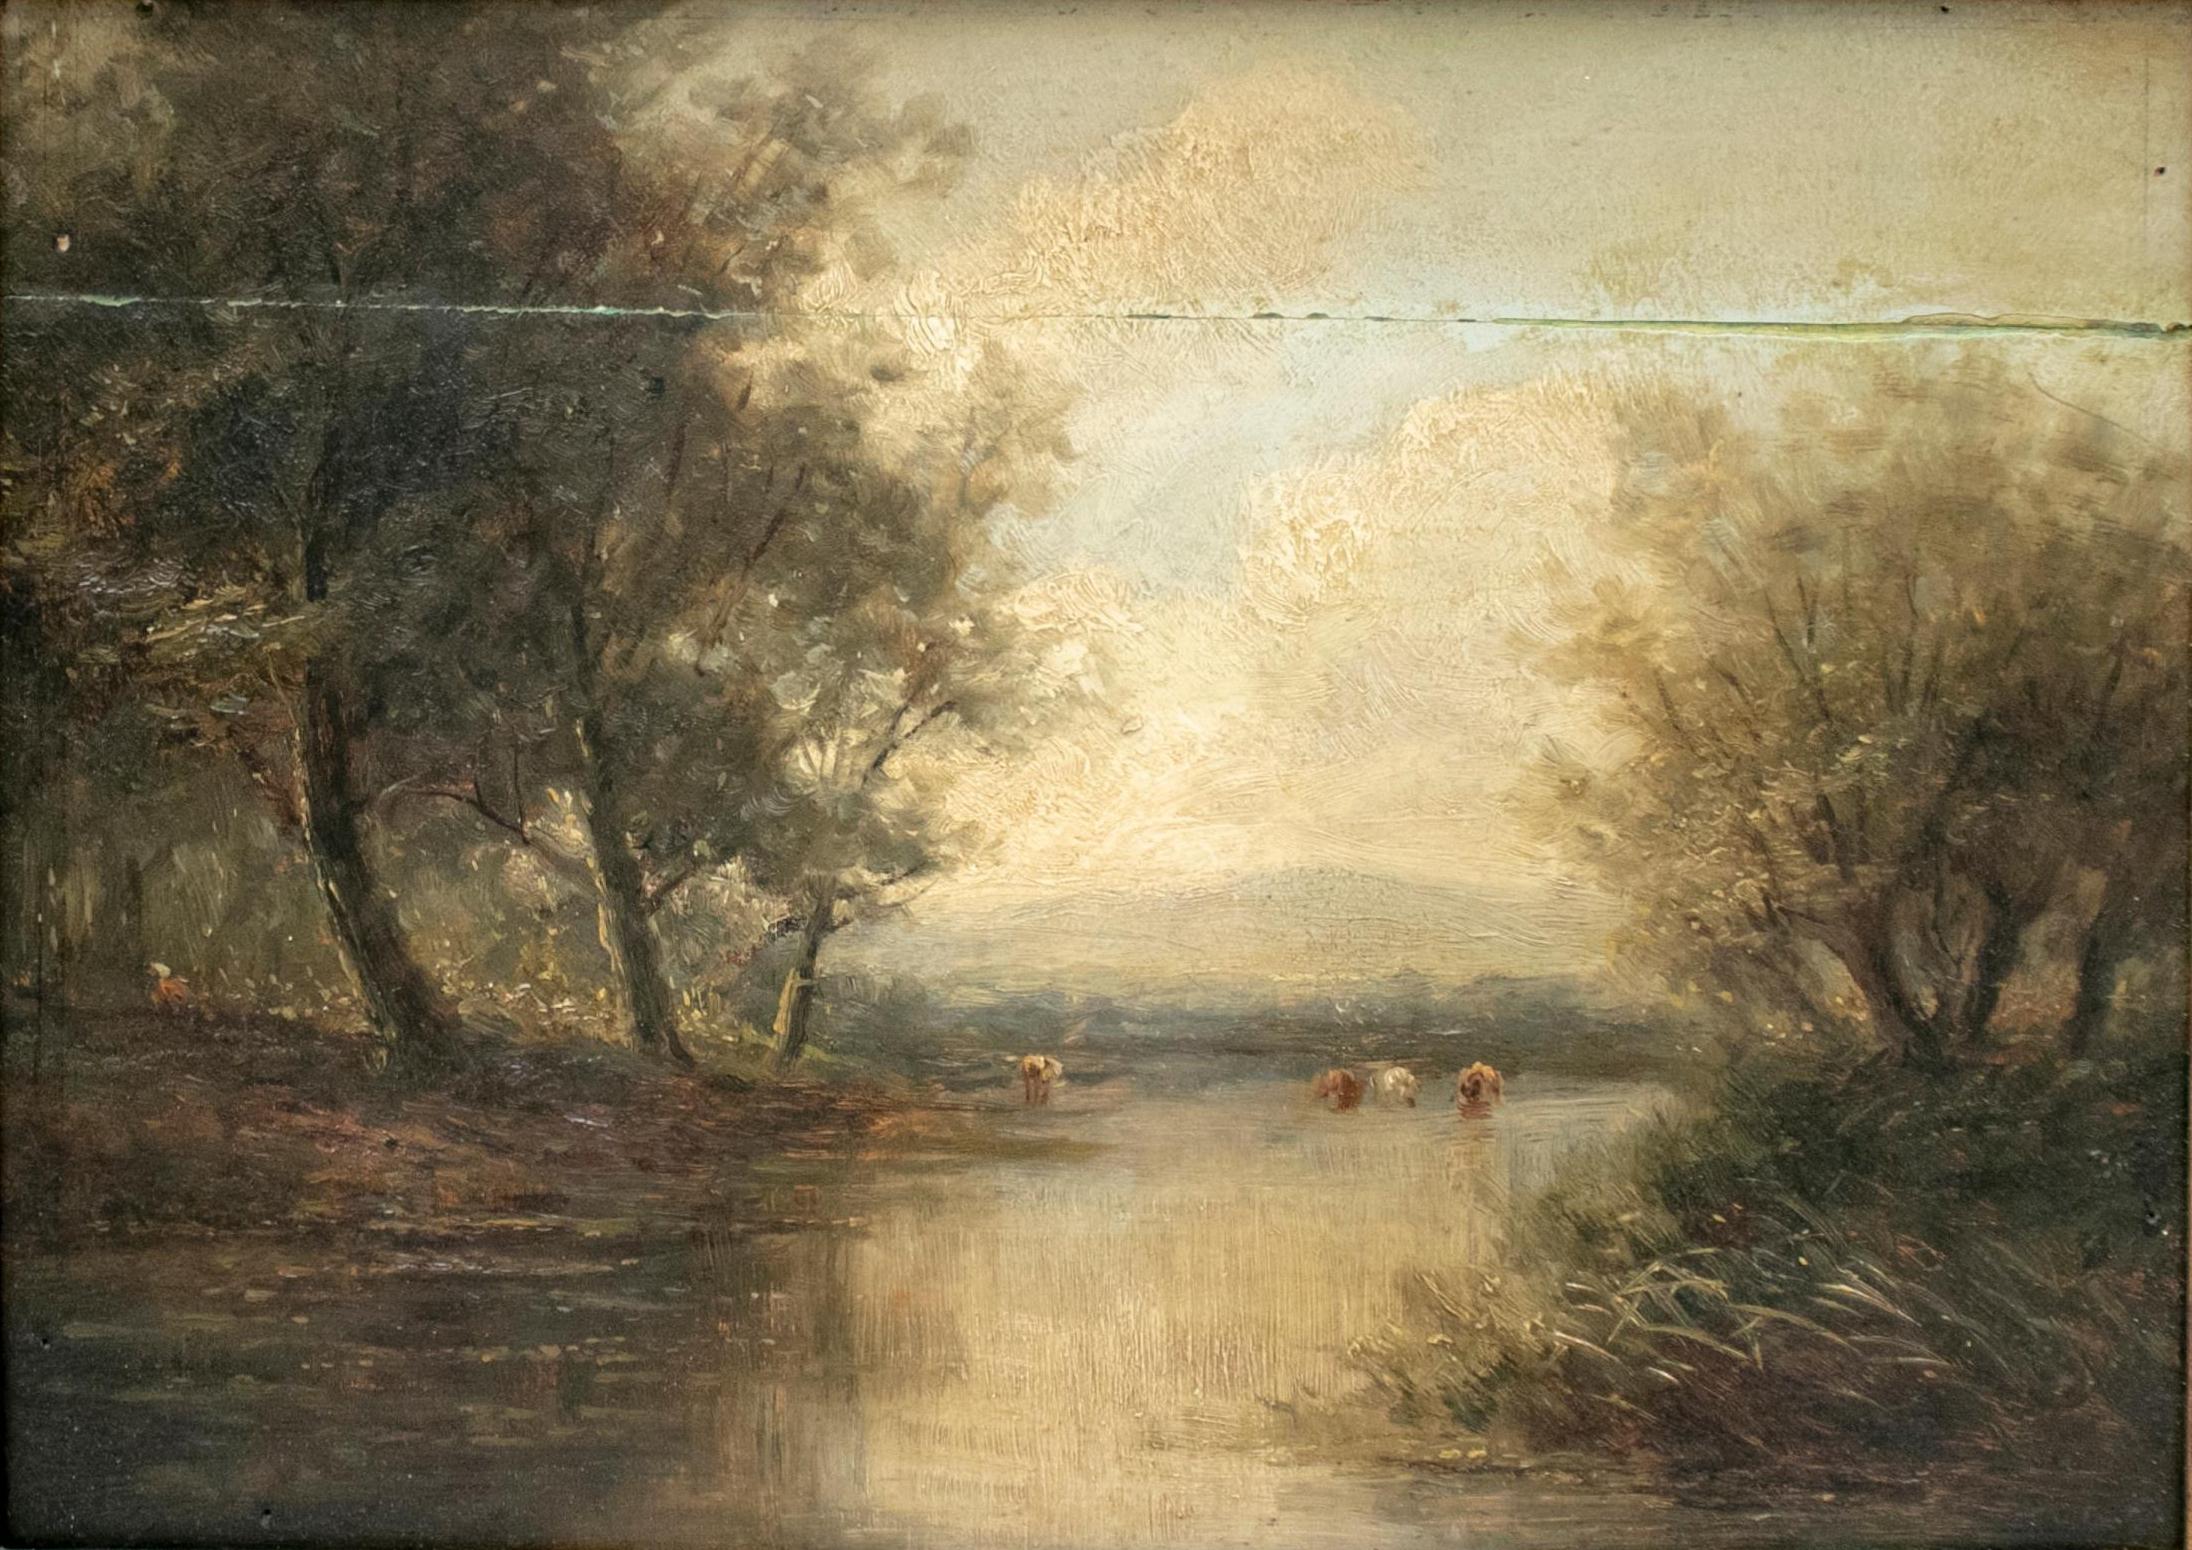 19th century English oil on canvas landscape with frame.

Dimensions with frame: 42.5 x 53.5cm.